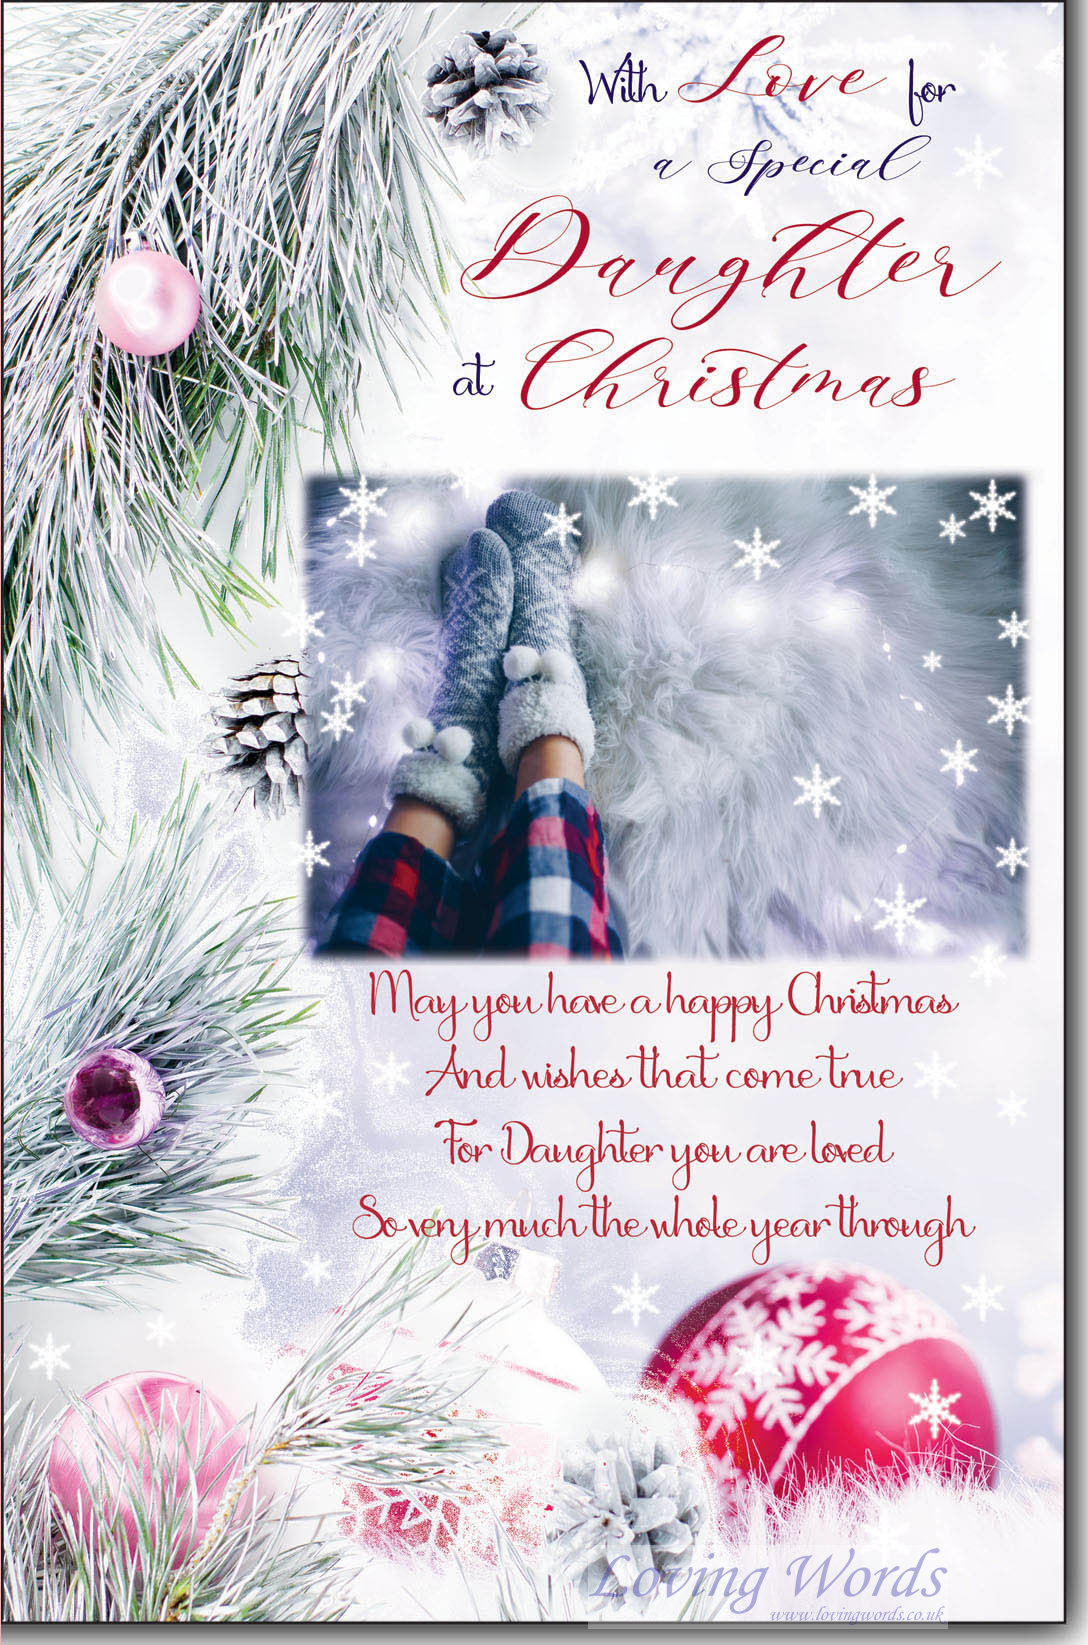 daughter-at-christmas-greeting-cards-by-loving-words